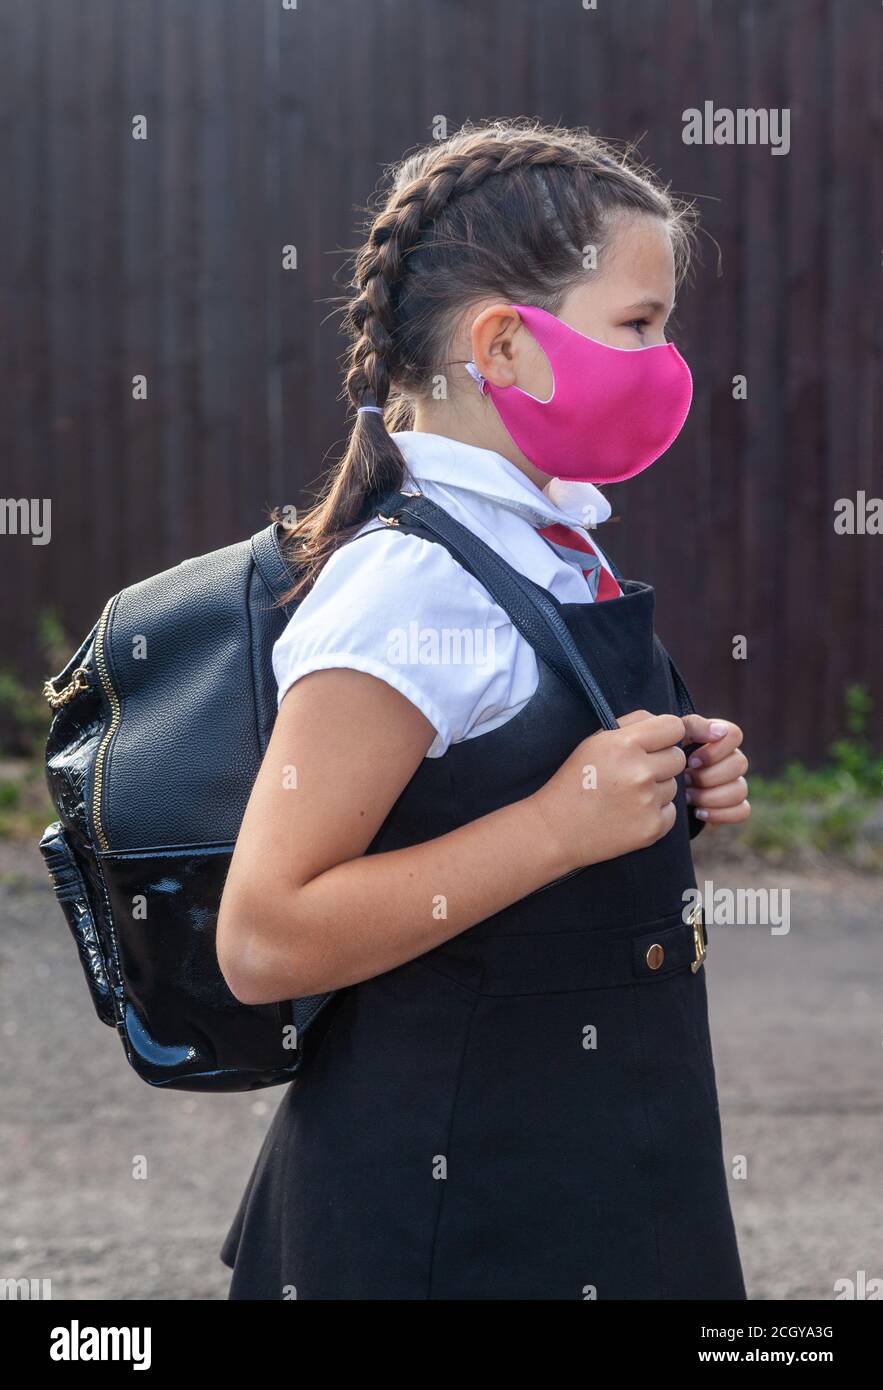 A 10 year old schoolgirl in school uniform and wearing a pink face mask Stock Photo